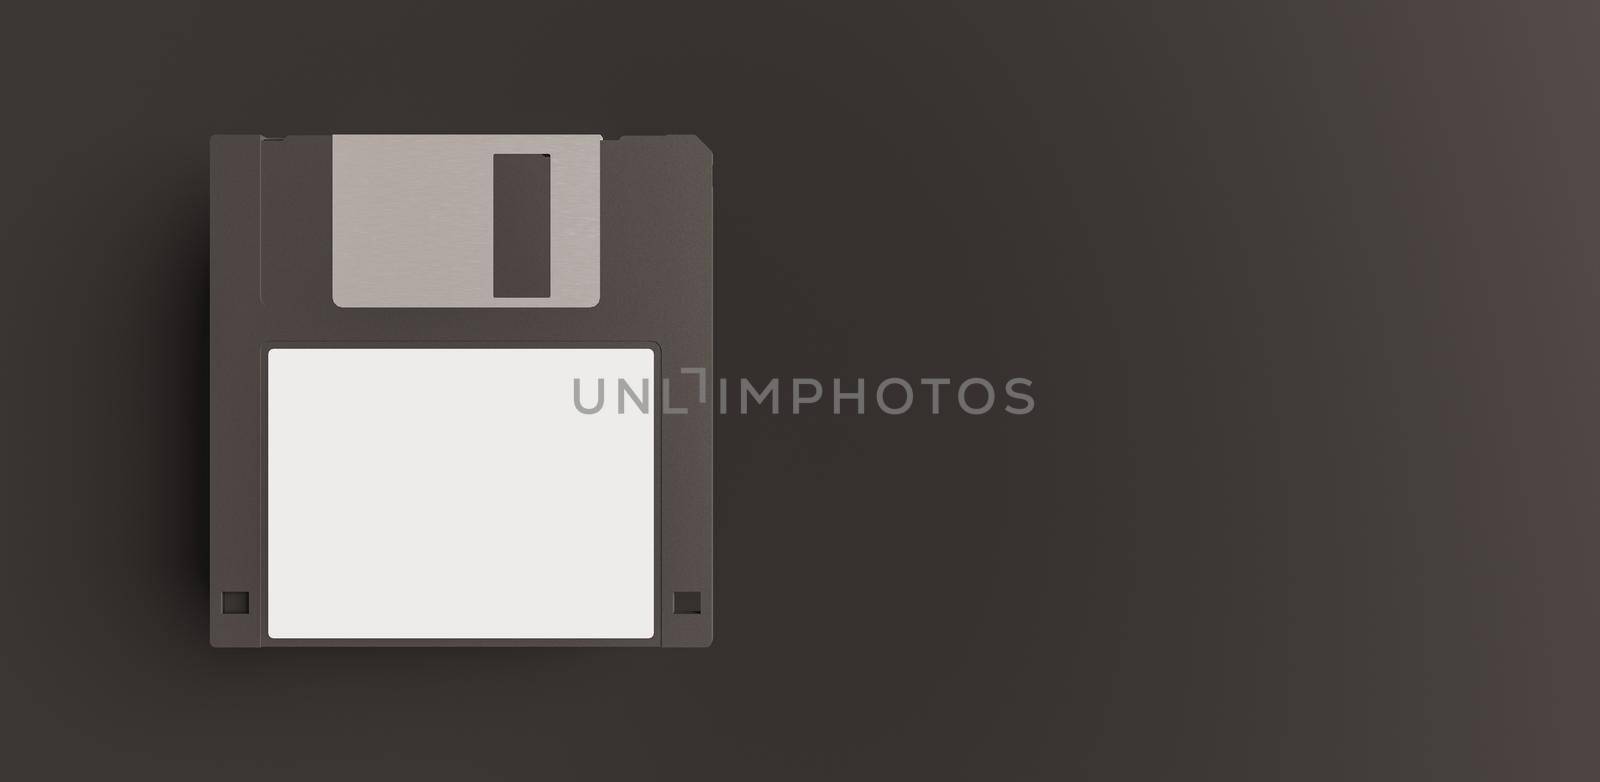 mockup of black floppy disk with white label by asolano